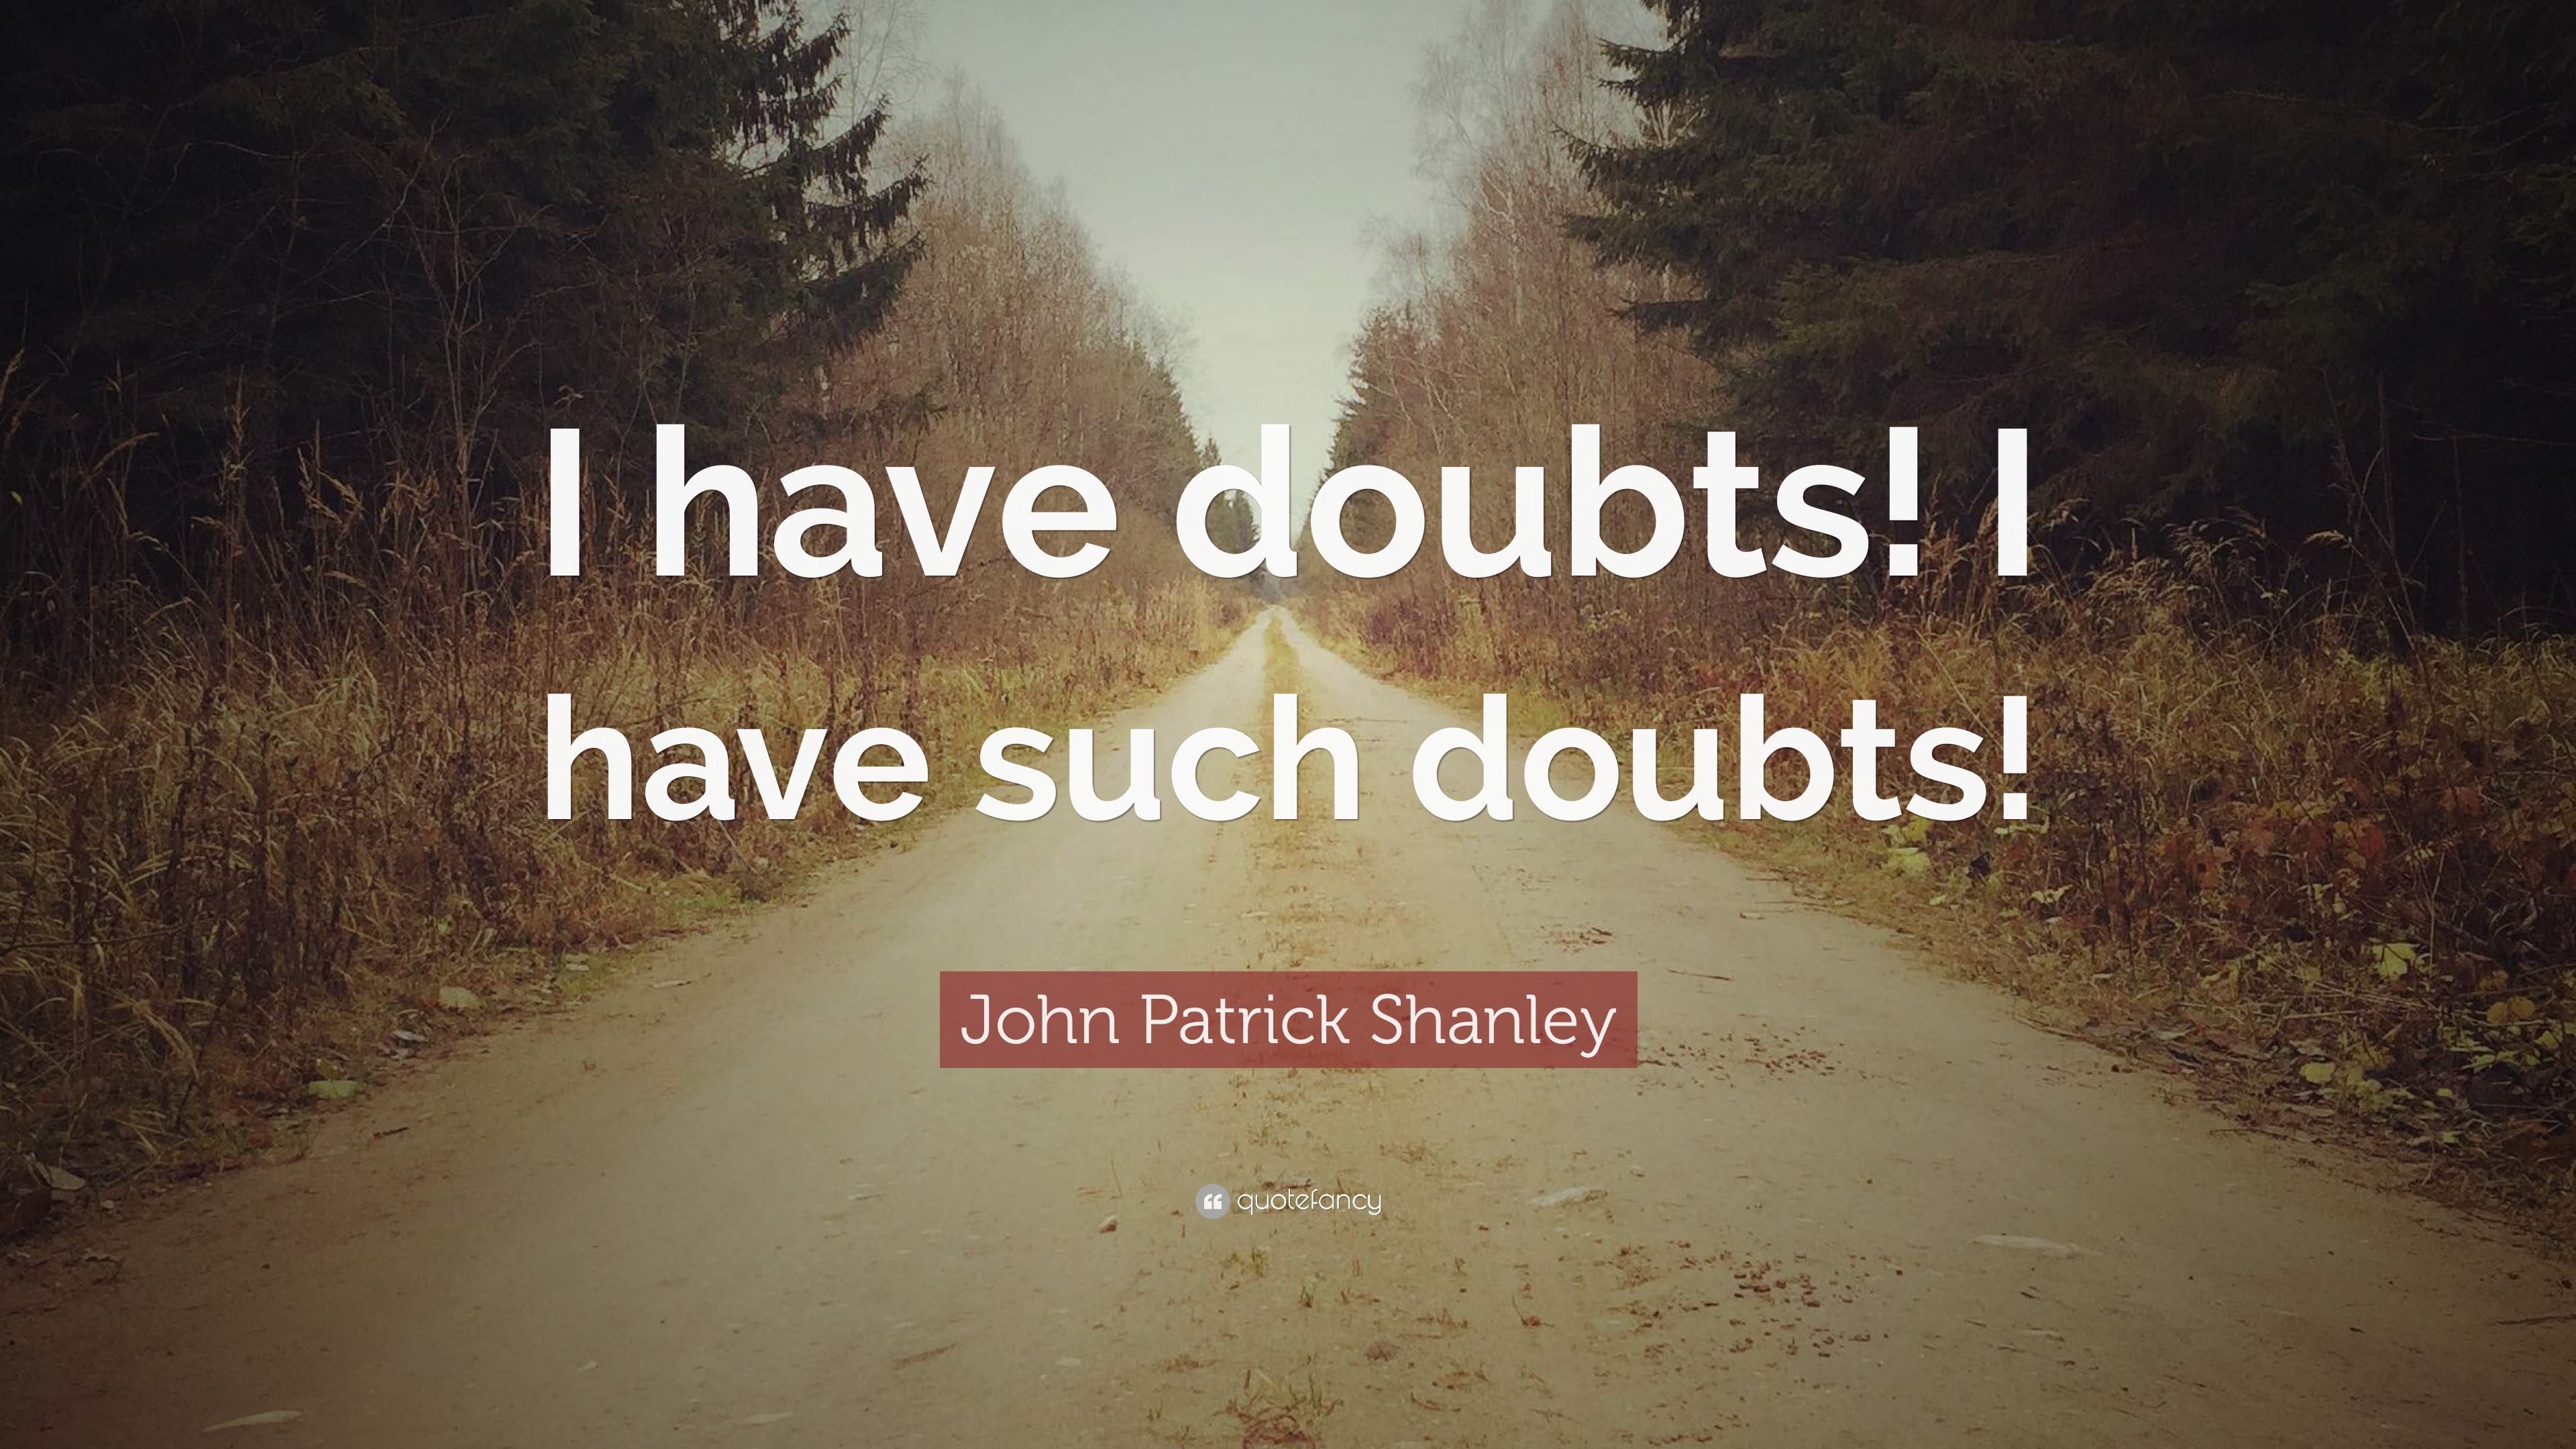 John Patrick Shanley Quote: “I have doubts! I have such doubts!”